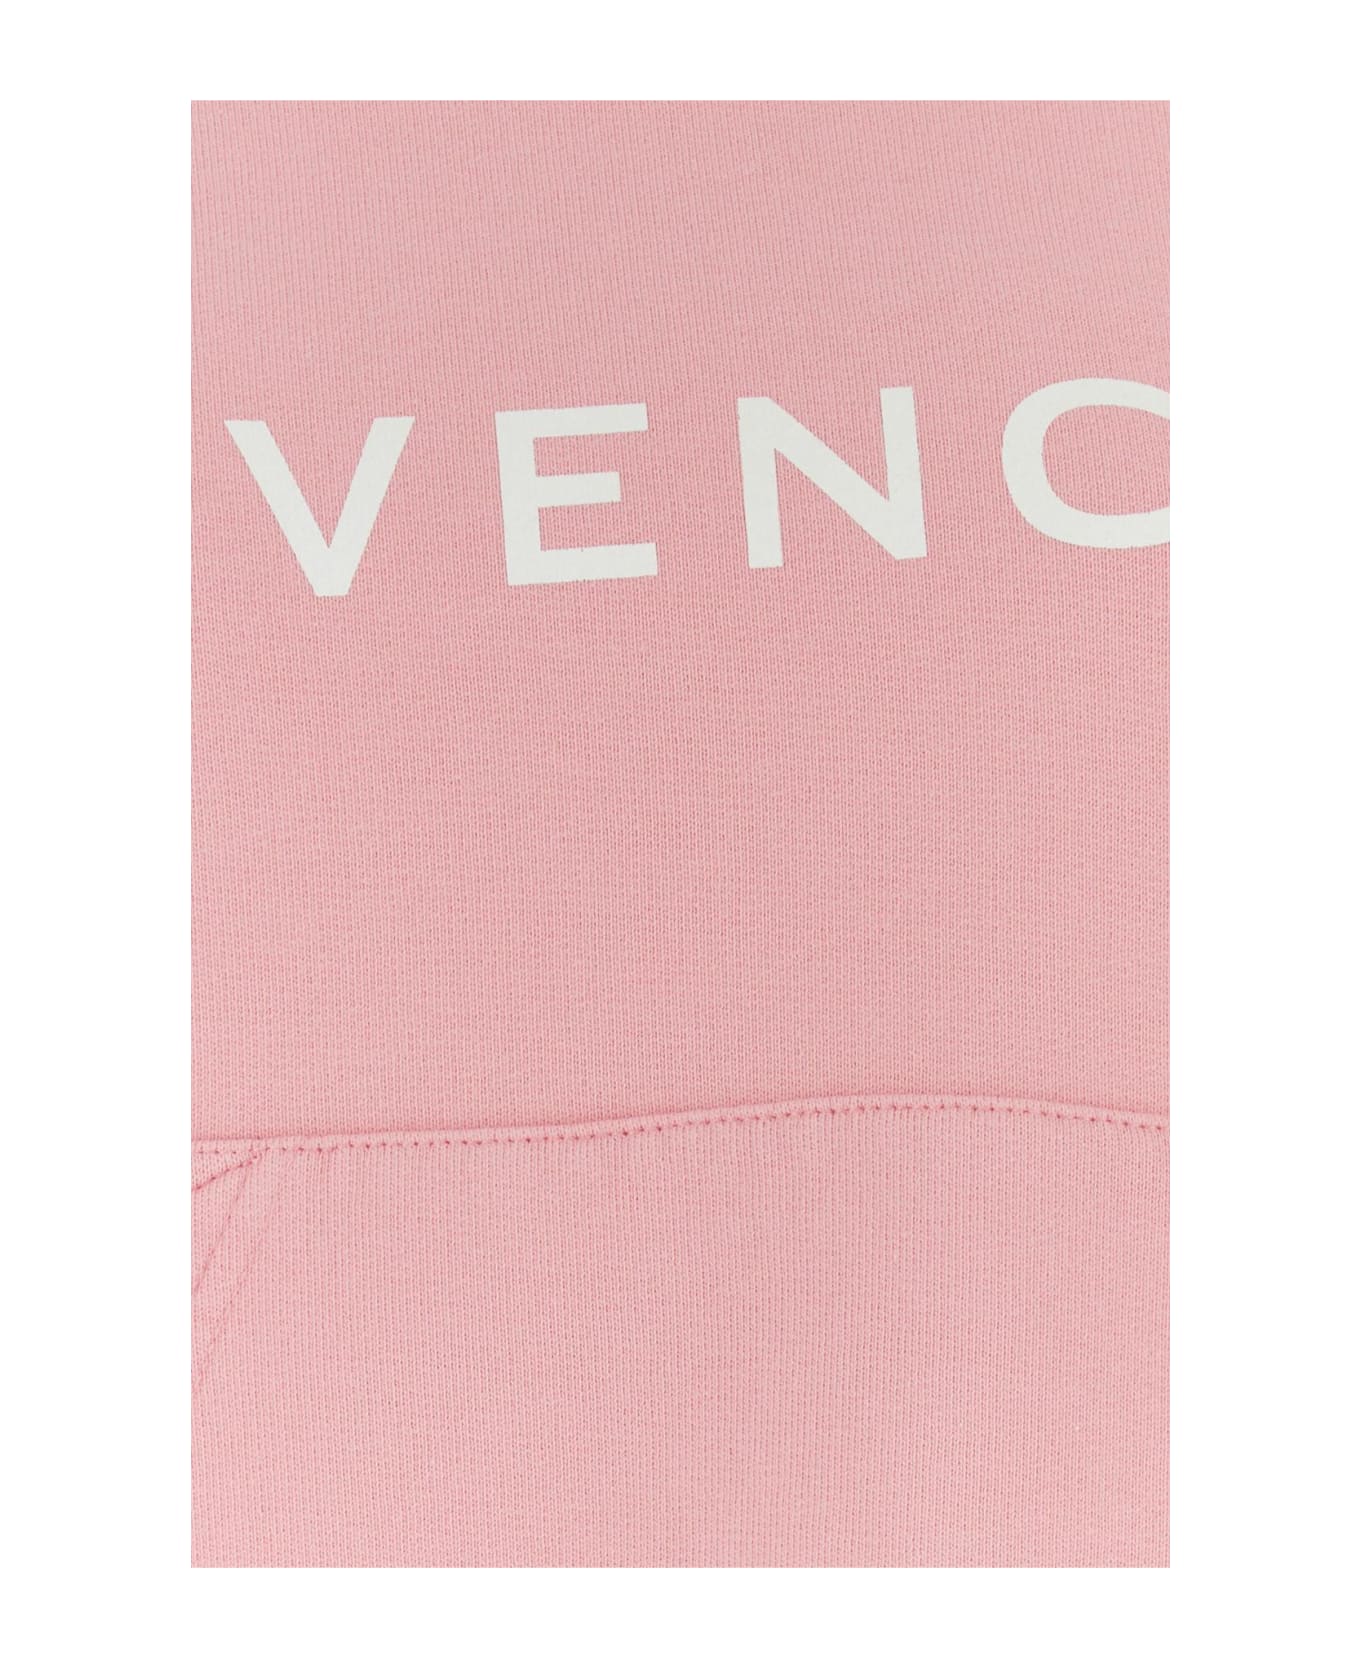 Givenchy Cropped Logo Hoodie - Pink フリース